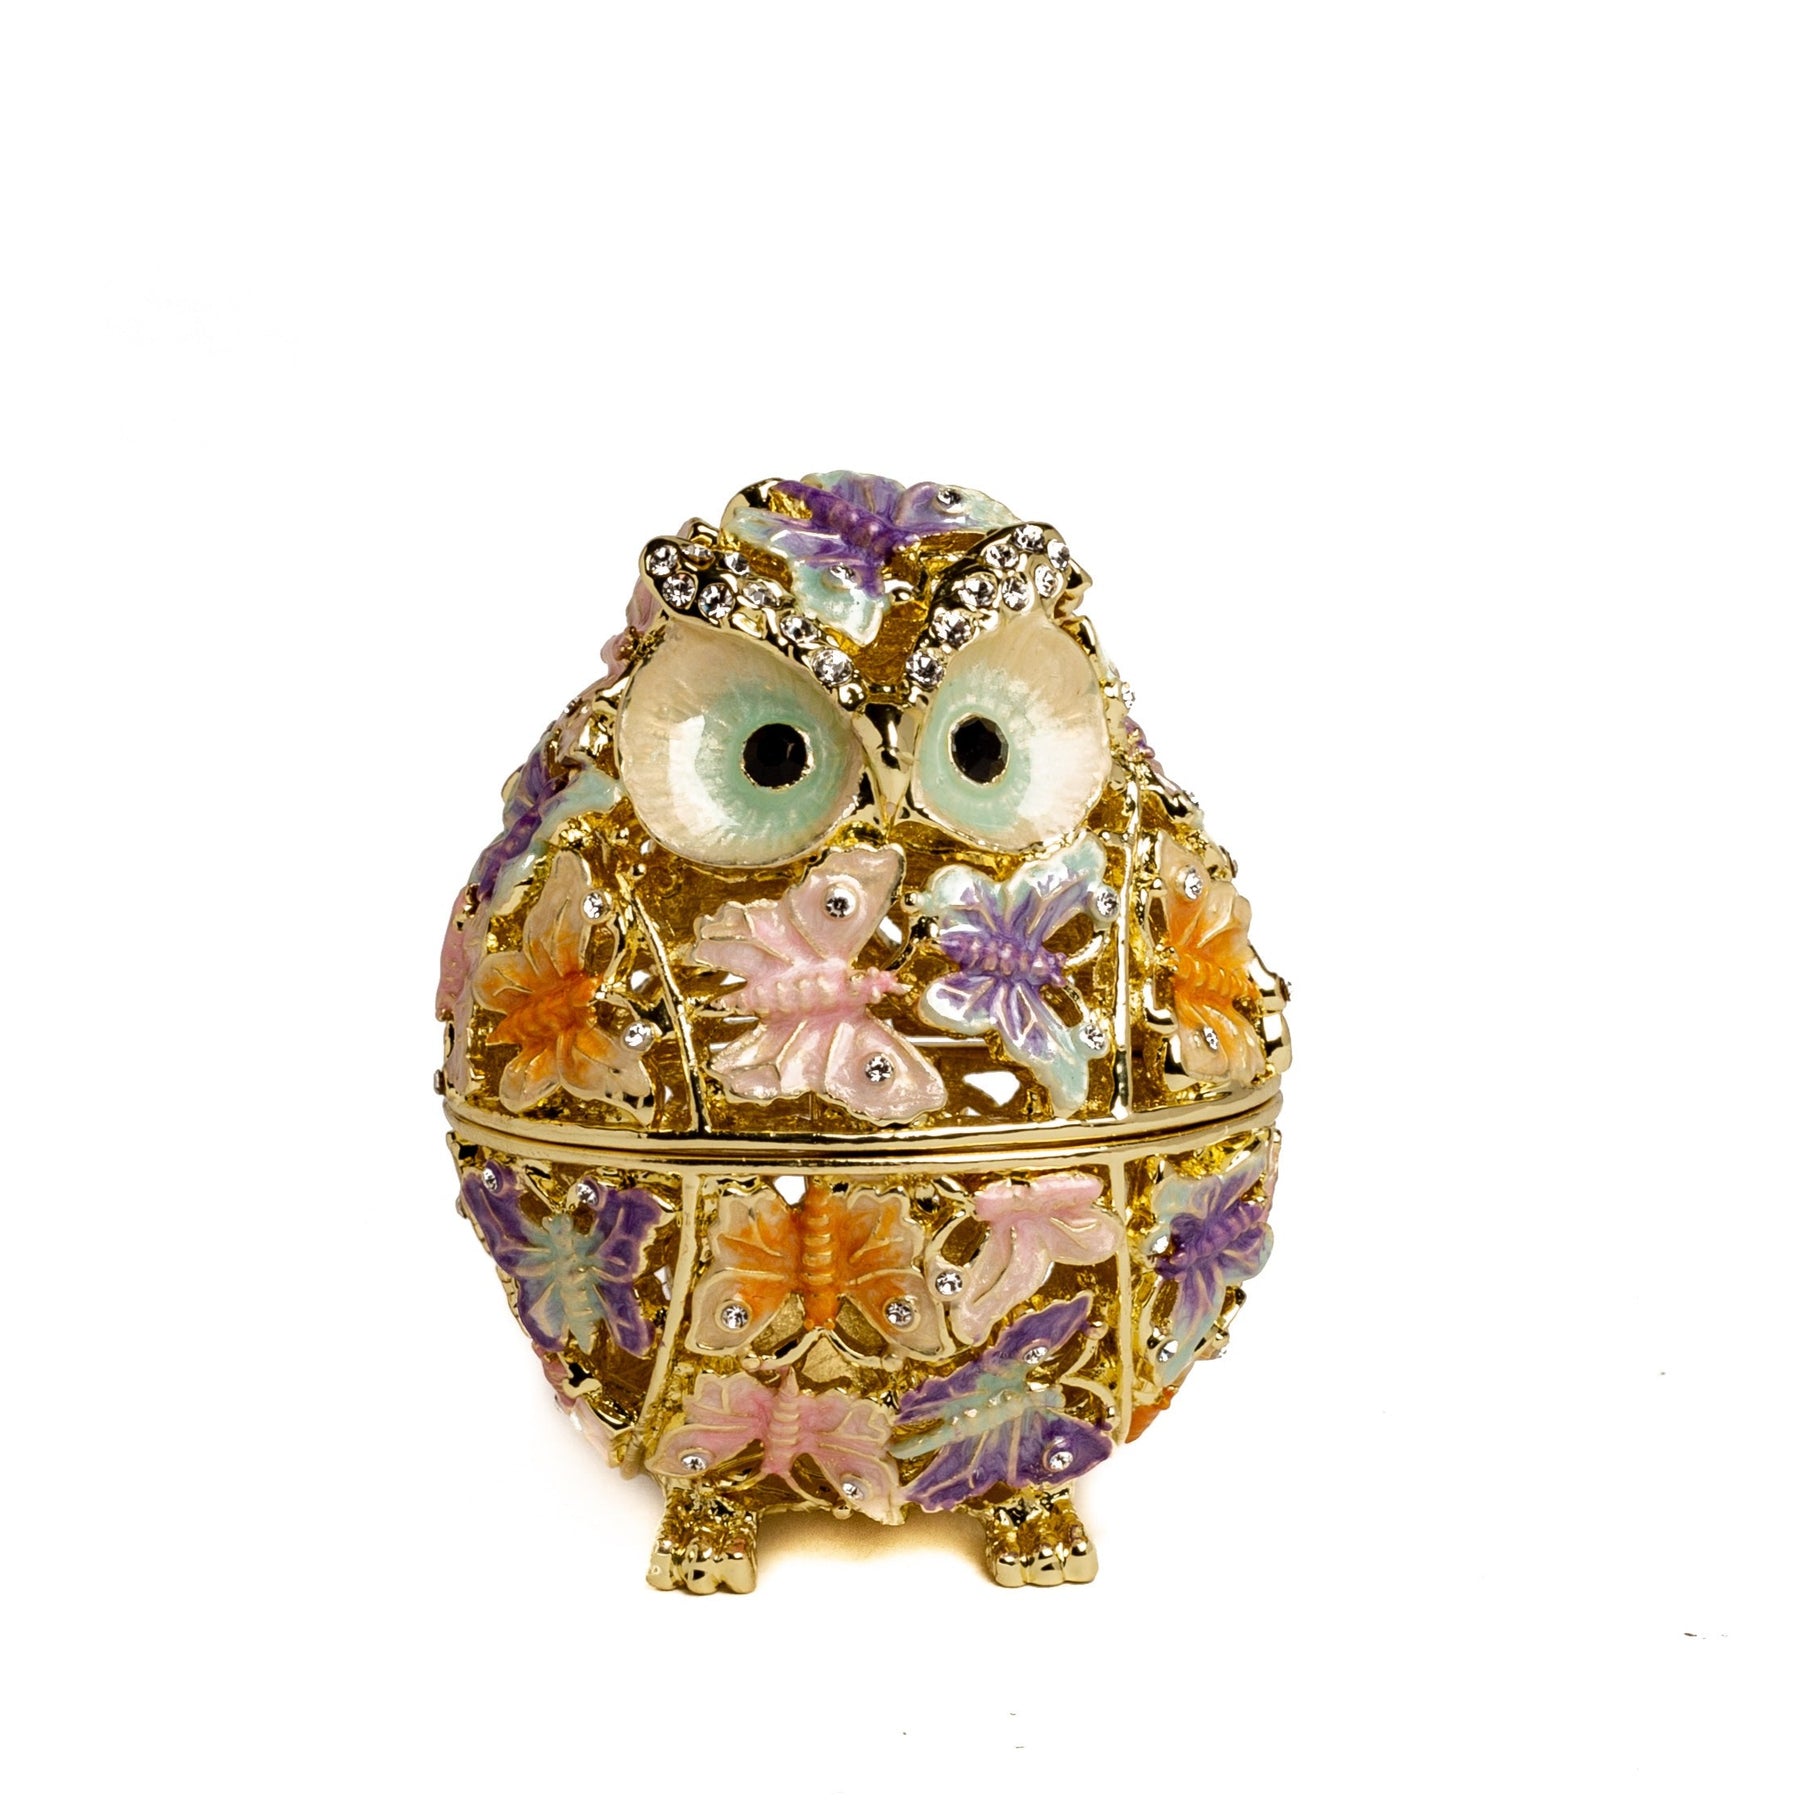 Golden Owl Decorated with Butterflies